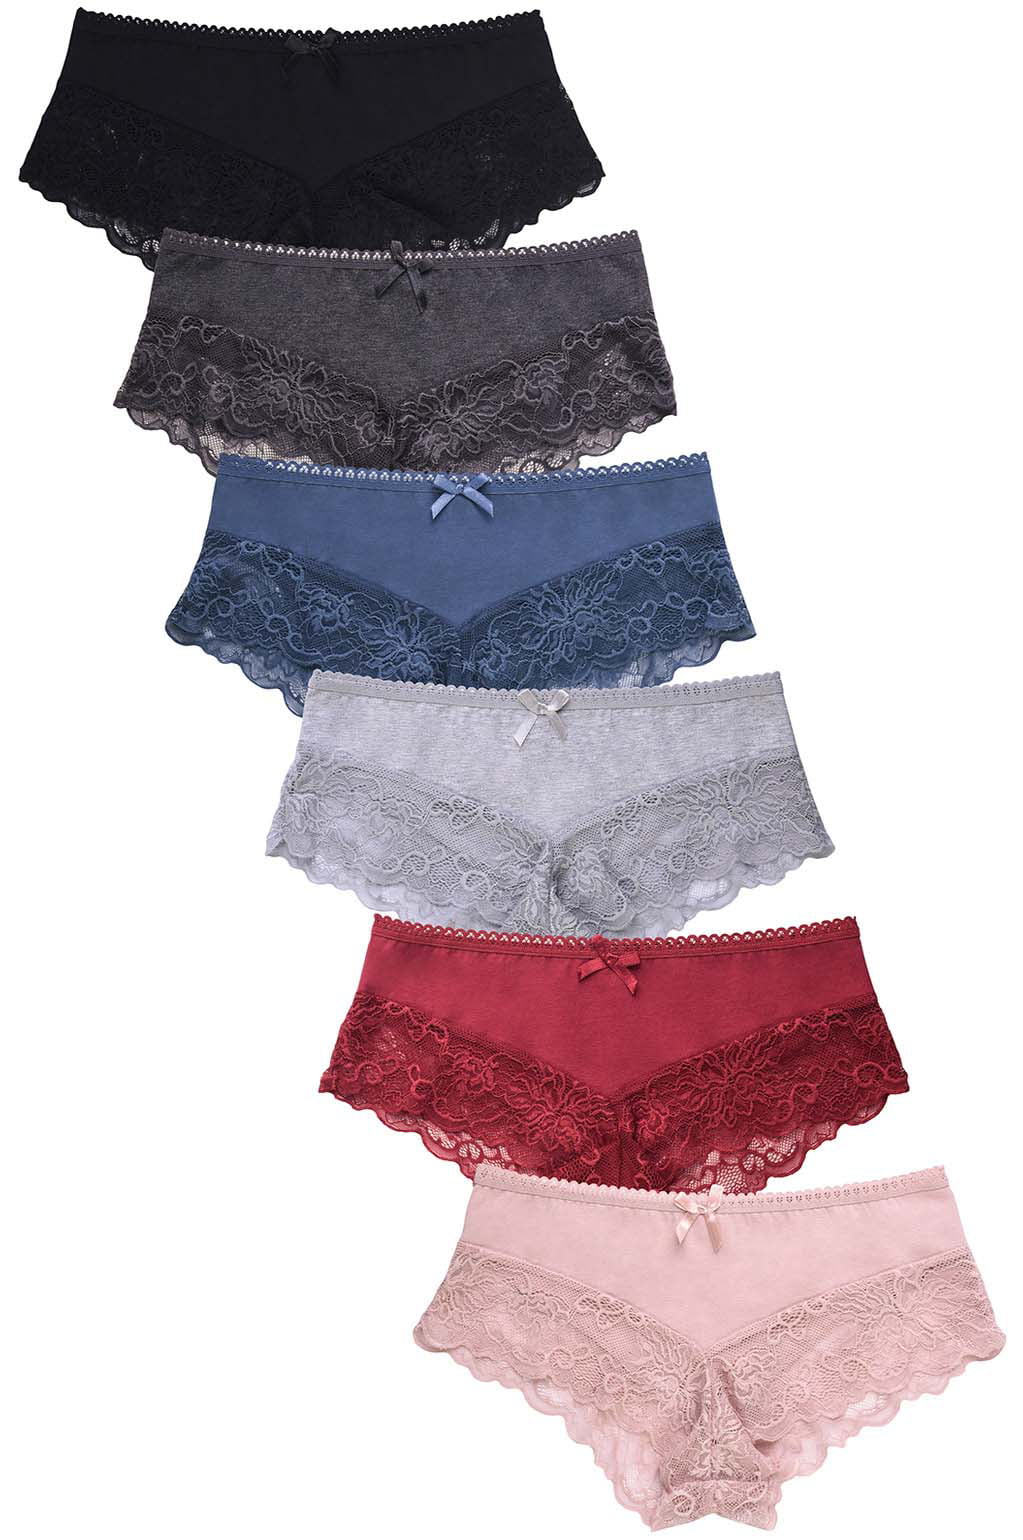 6 Pack of Womens Cotton Hipster Panties Low-Rise Boyshorts w/Stretch ...